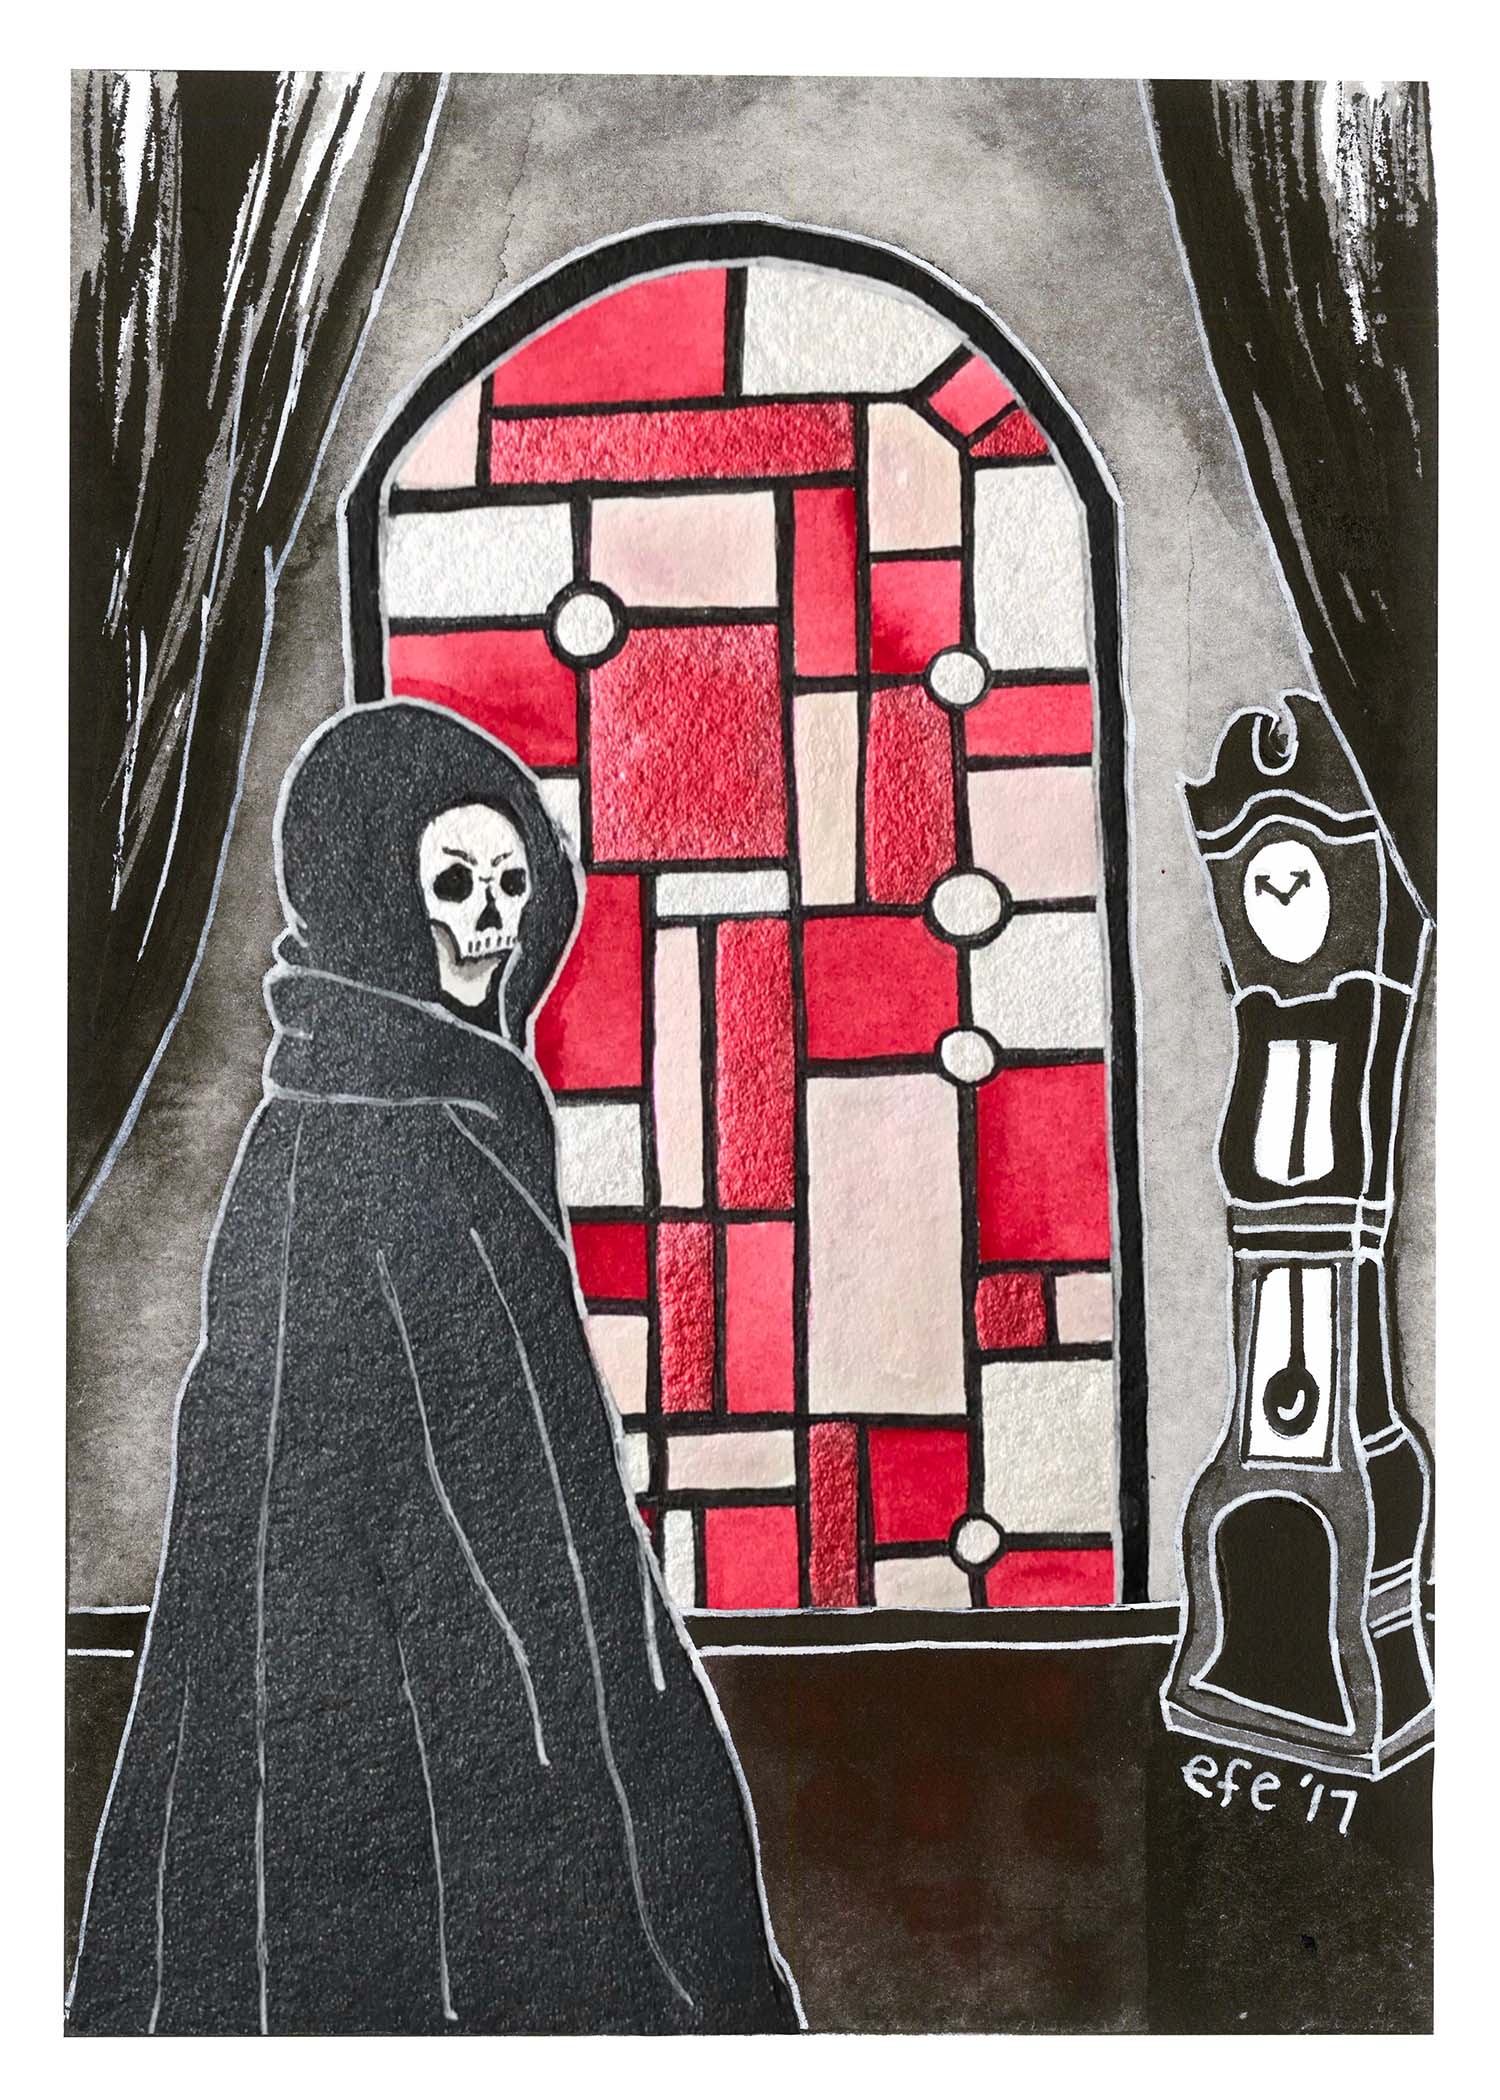 Day 08 - The Masque of the Red Death